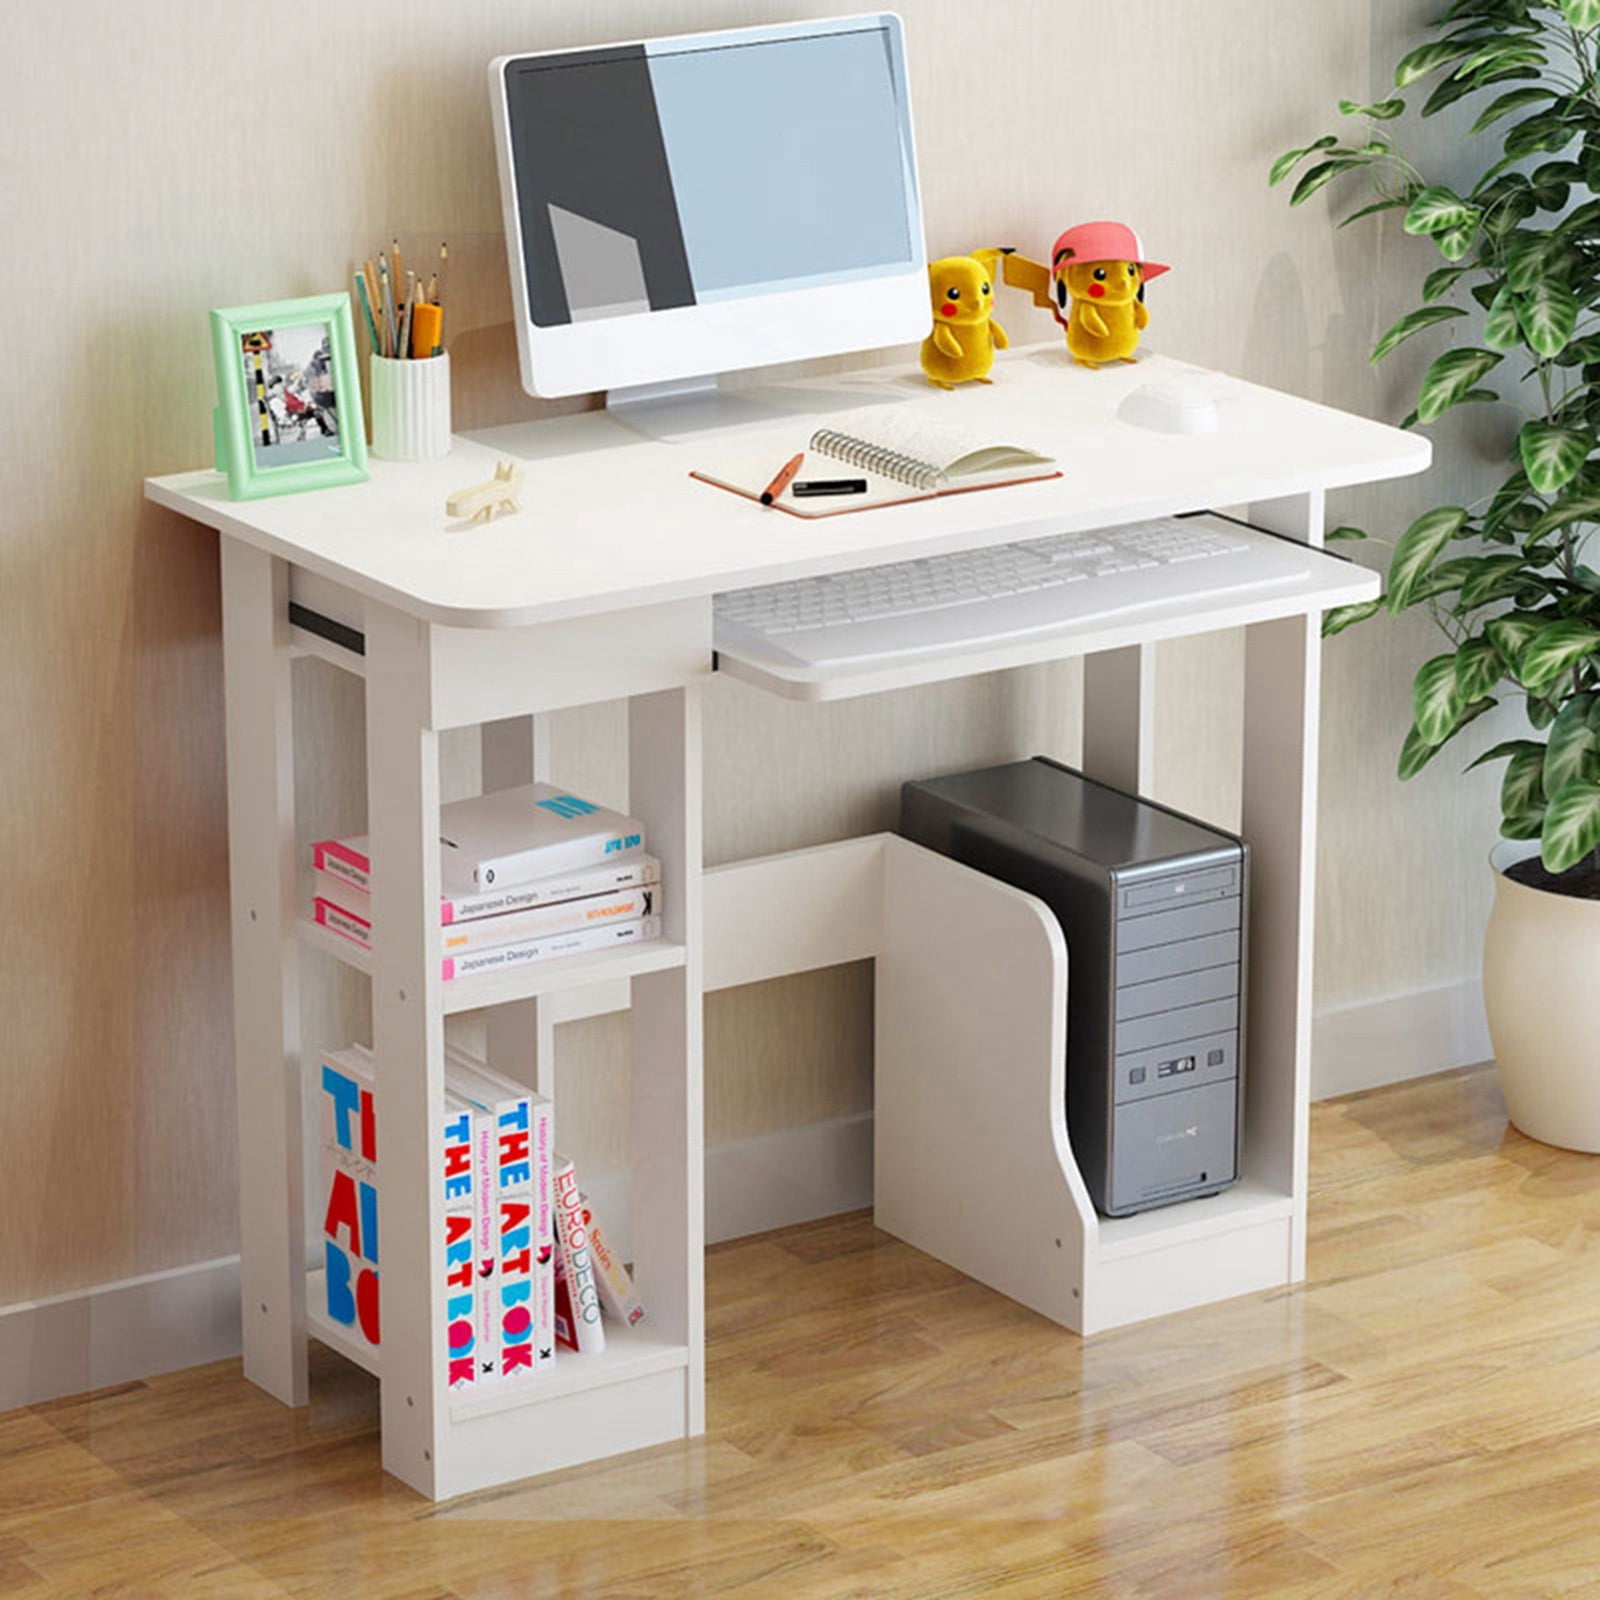 Details about   Floating Desk Wall Mounted Desk With Storage Shelves Home Computer Table Desk 